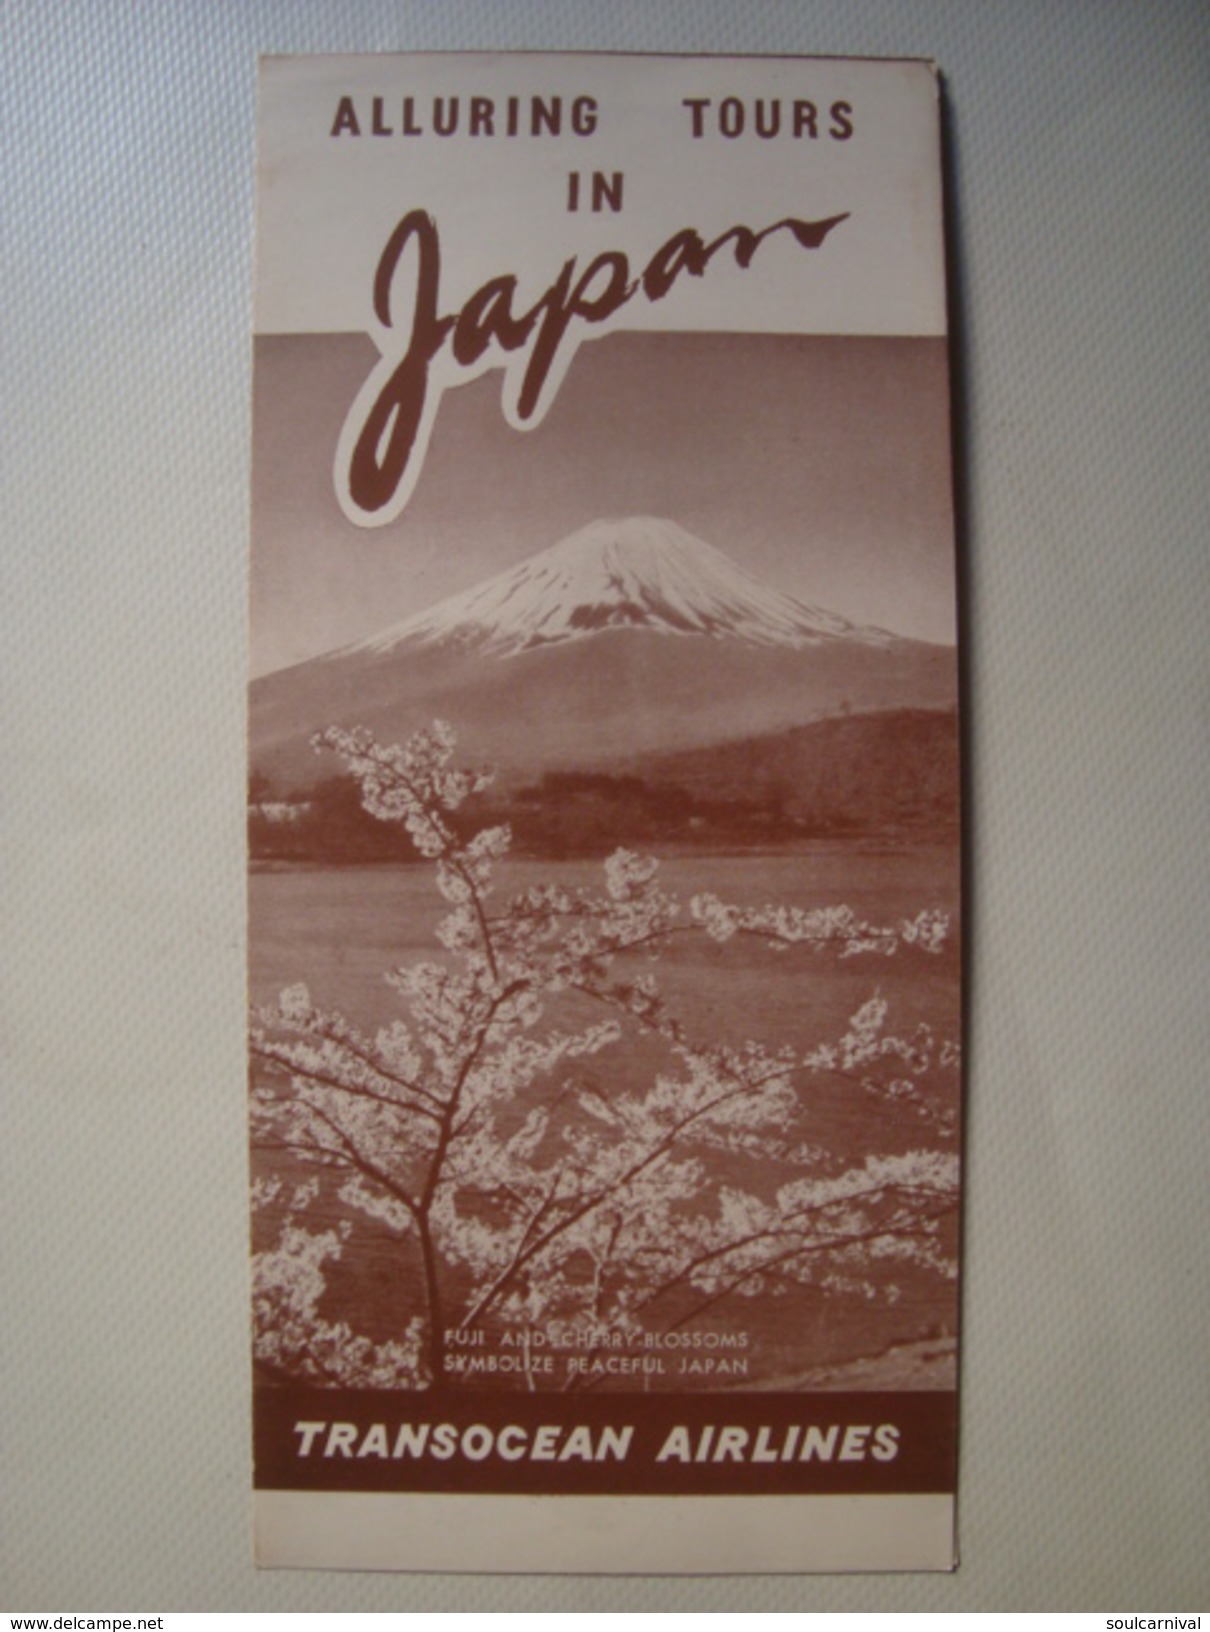 ALLURING TOURS IN JAPAN. TRANSOCEAN AIRLINES. FUJI CHERRY-BLOSSOMS PEACEFUL JAPAN - 1950 APROX. MADE IN OCCUPIED JAPAN. - Pubblicità